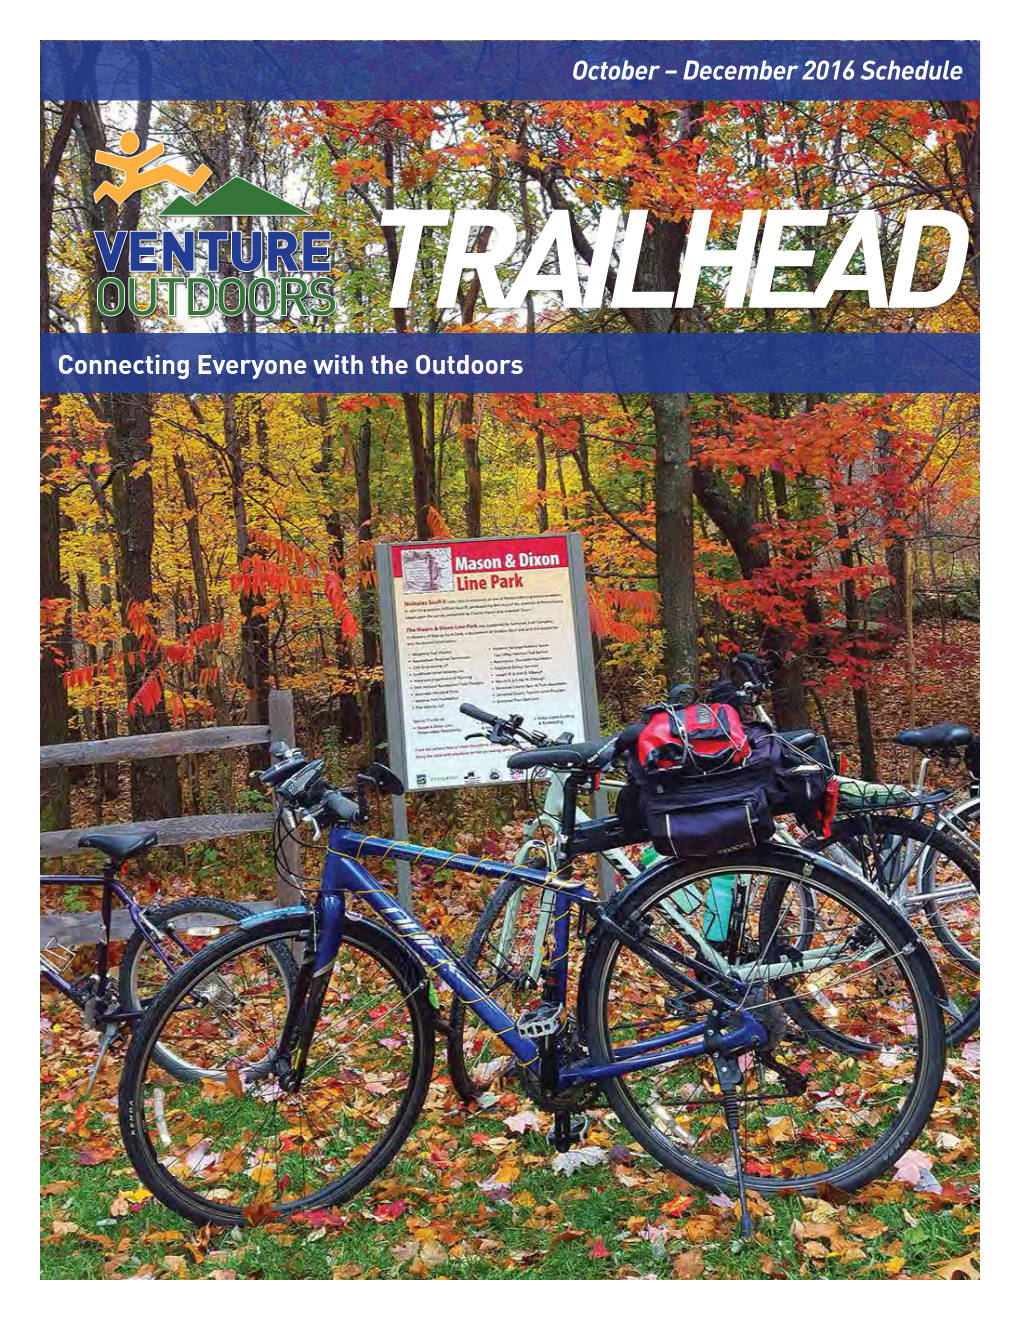 VENTURE OUTDOORS Trailhead Connecting Everyone with the Outdoors DID YOU KNOW… BOARD of DIRECTORS Venture Outdoors Is a 501(C)3 Charitable Nonprofit Organization